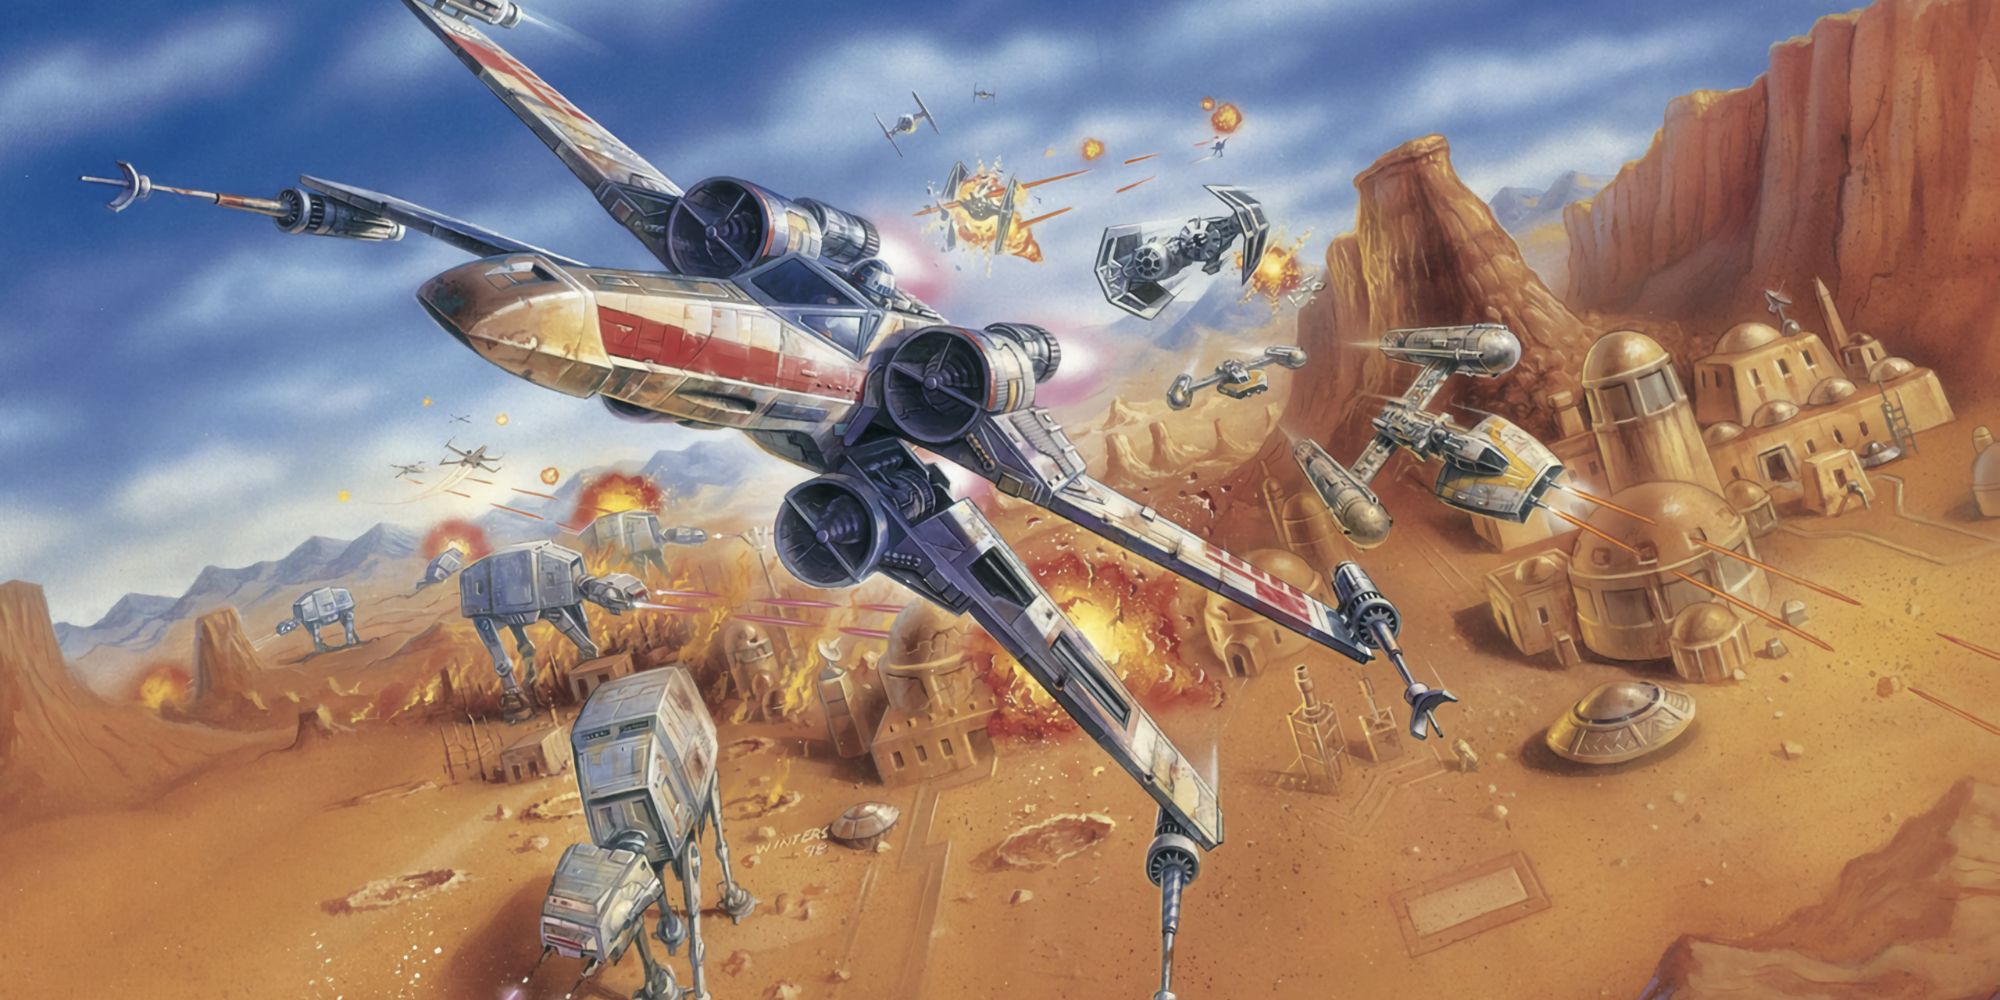 A Star Wars X-Wing and a couple other rebel starships are being chased in a dogfight by Imperial ships. Other skirmishes are in the background, including one where a TIE Fighter is being blown up. The aerial fight is located over a city in a desert, where Imperial AT-ATs are attacking.